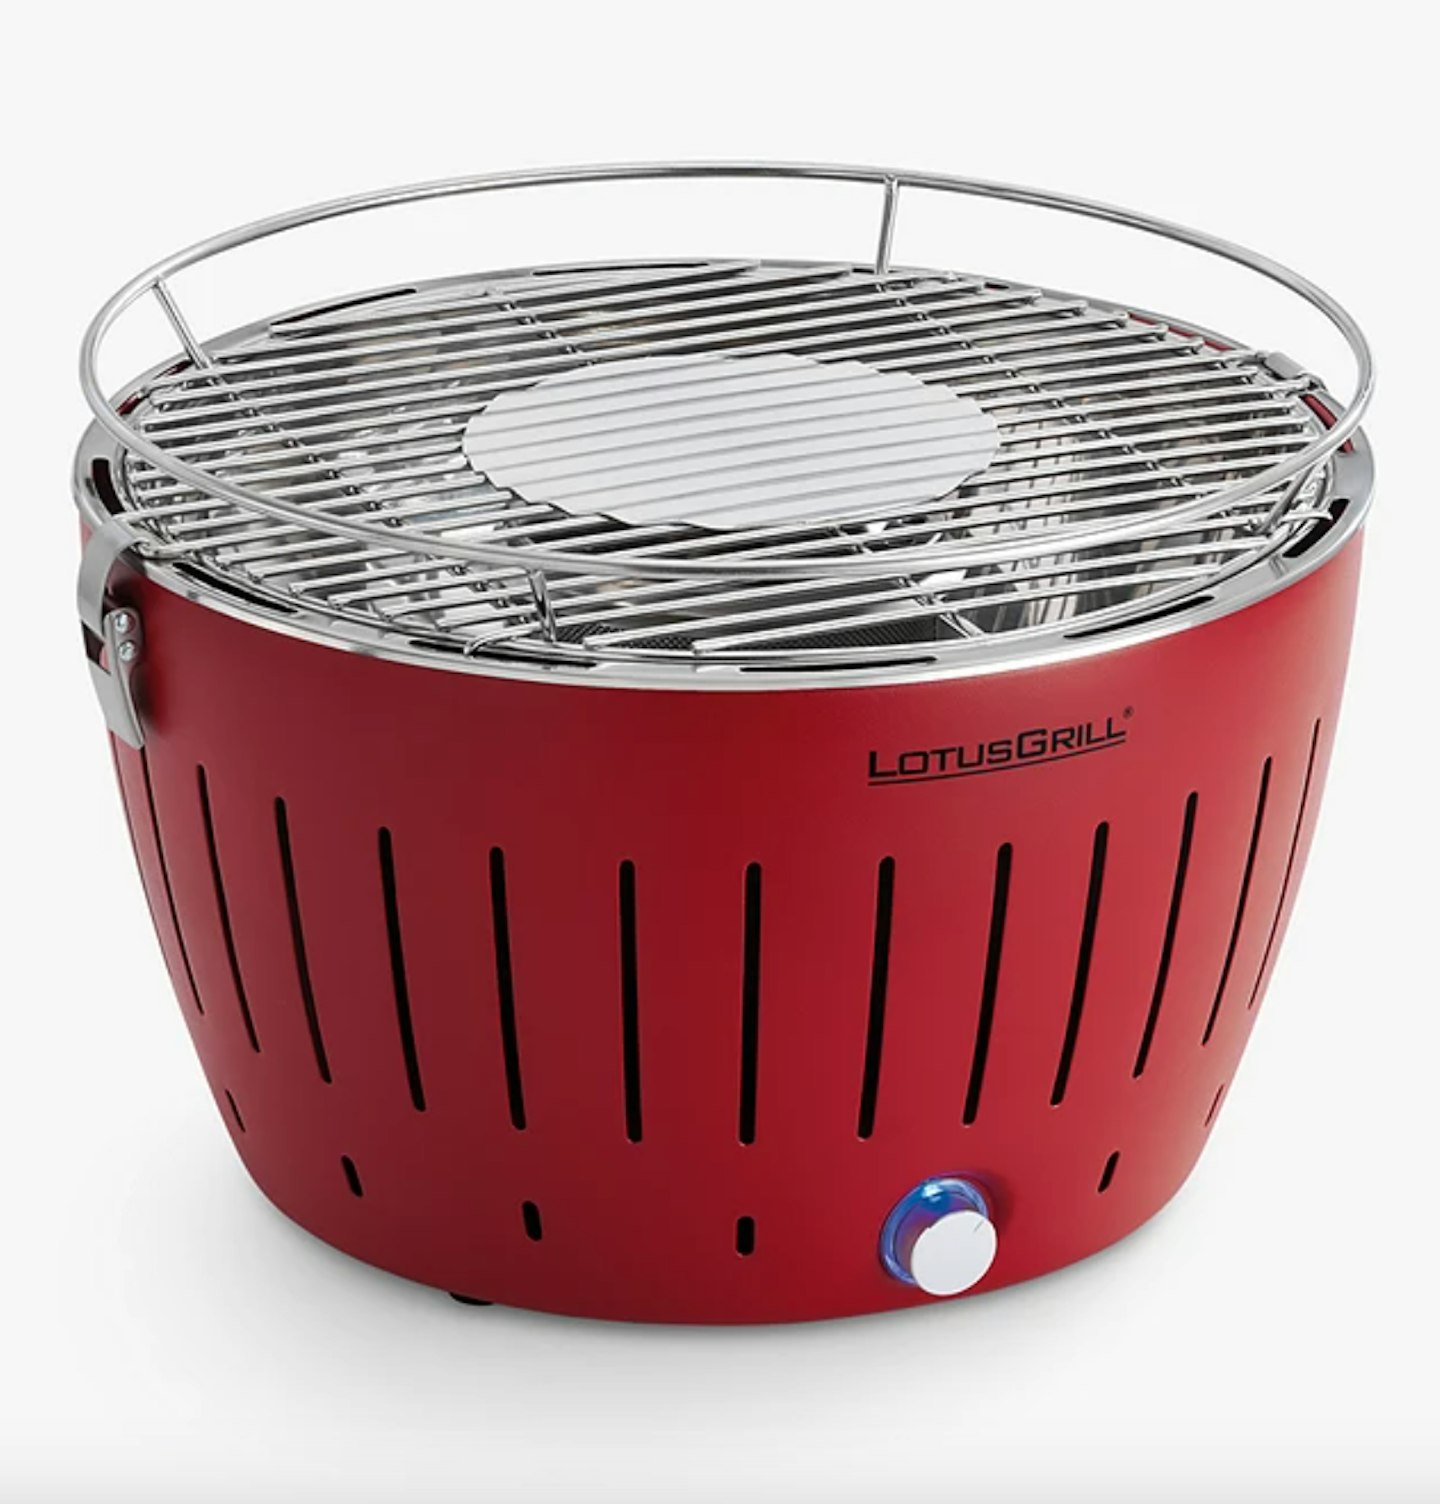 LotusGrill Standard Portable Smokeless Charcoal Barbecue, 32cm, Red